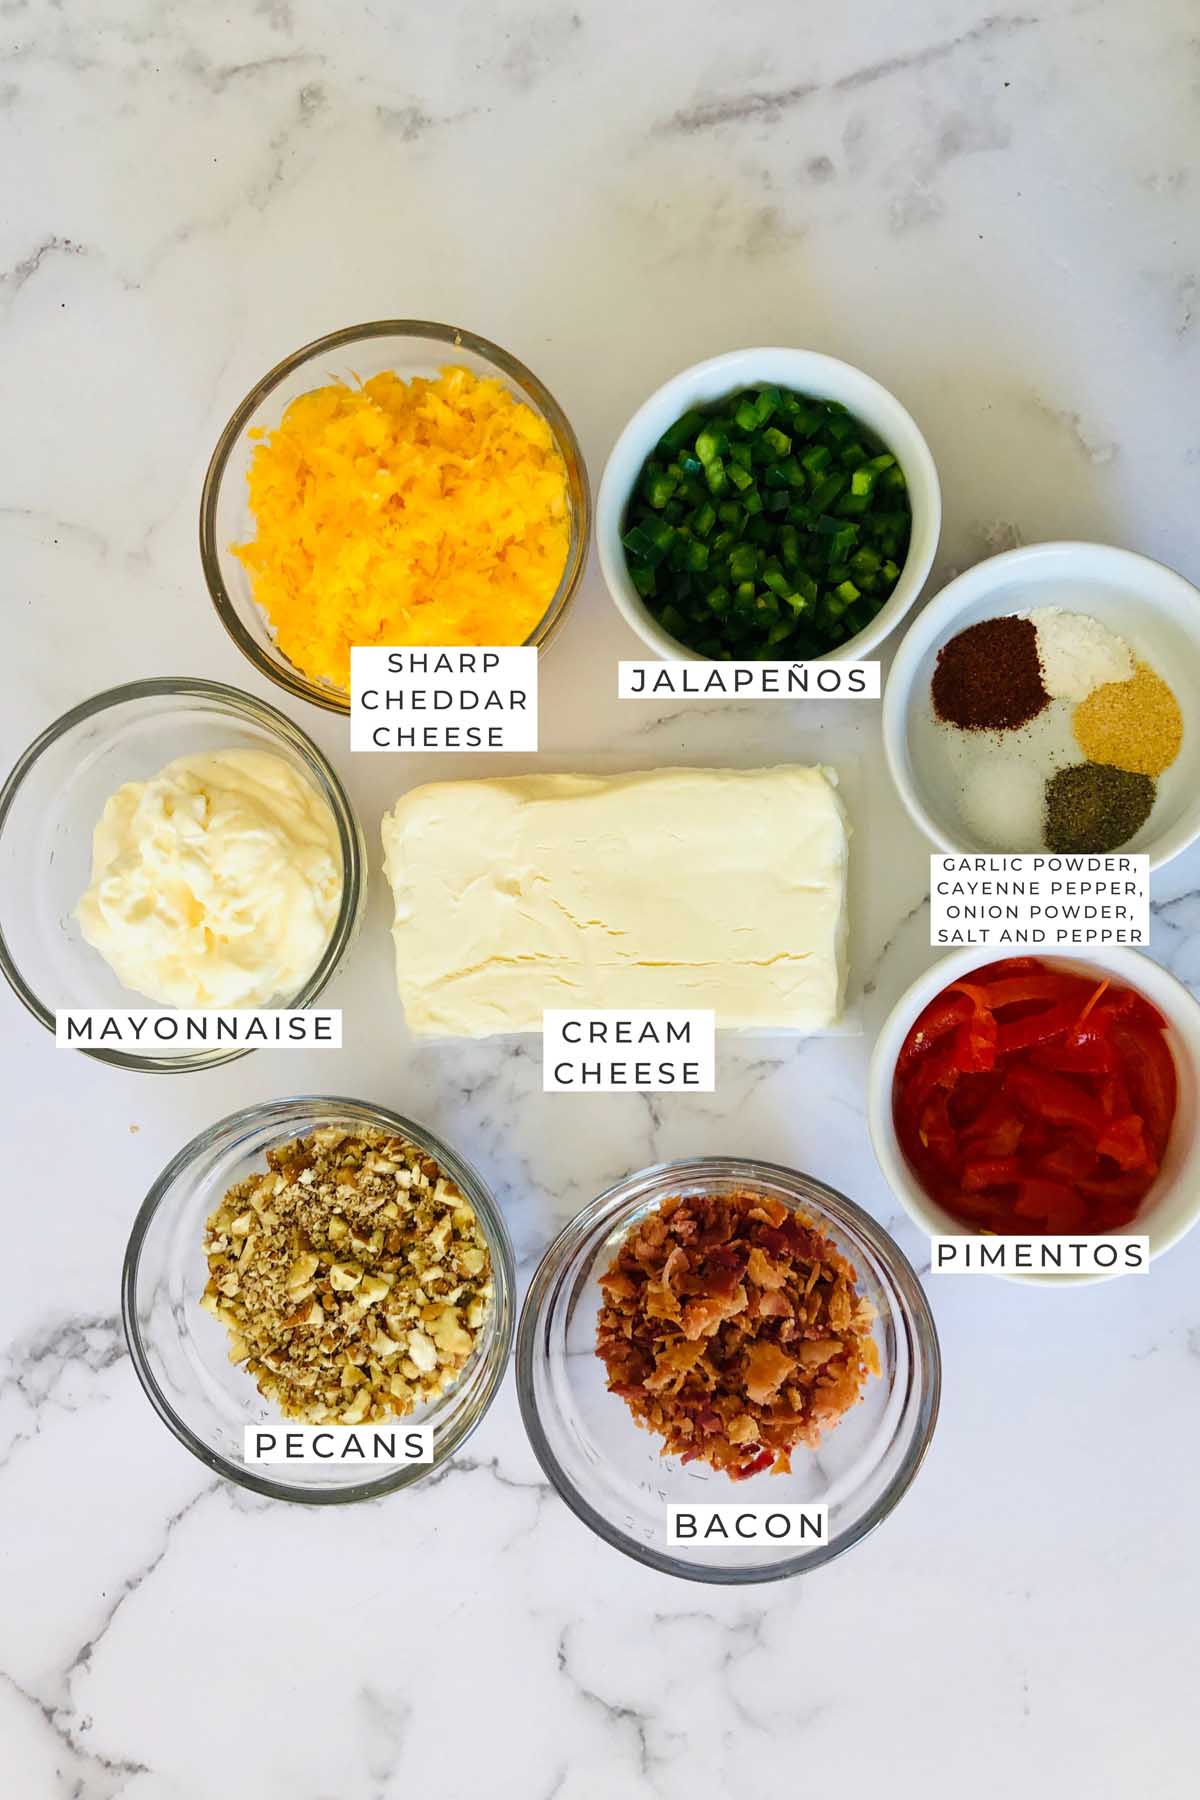 Labeled ingredients for the cheese balls.